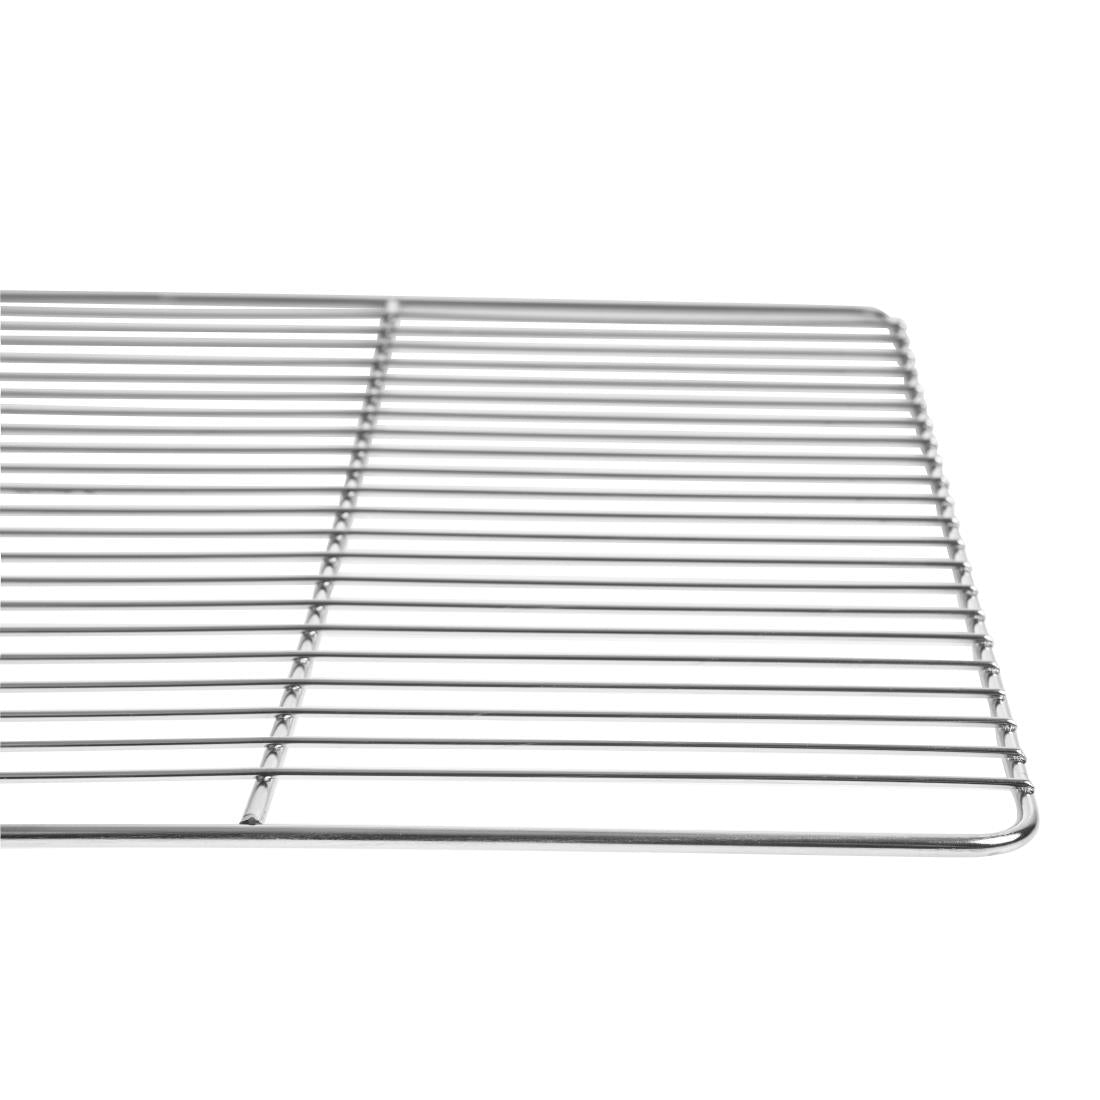 CX526 Matfer Bourgeat Stainless Steel Grate 400X300mm JD Catering Equipment Solutions Ltd